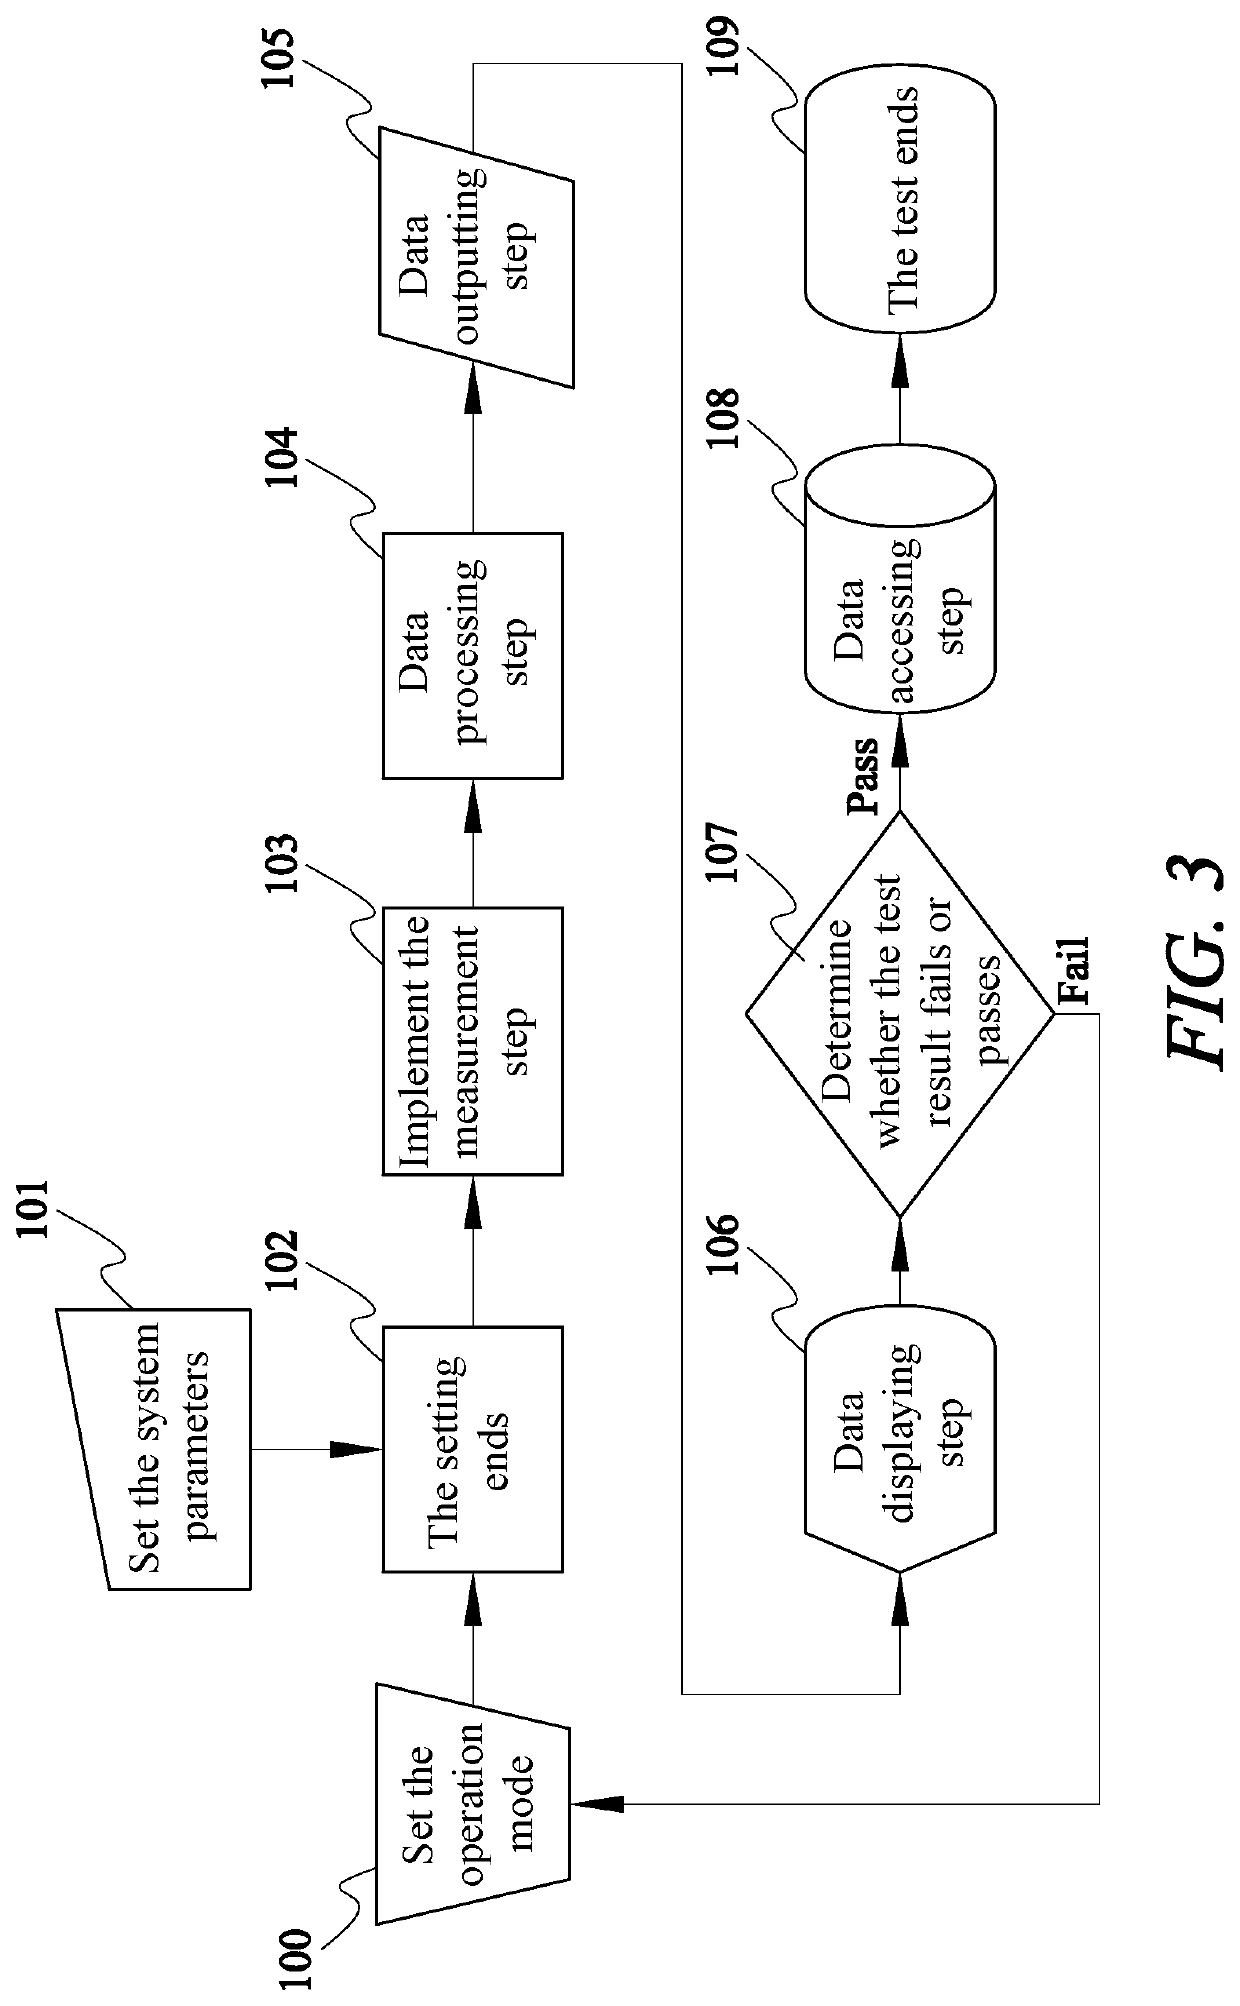 High-speed radiated spurious emission automated test system and method thereof